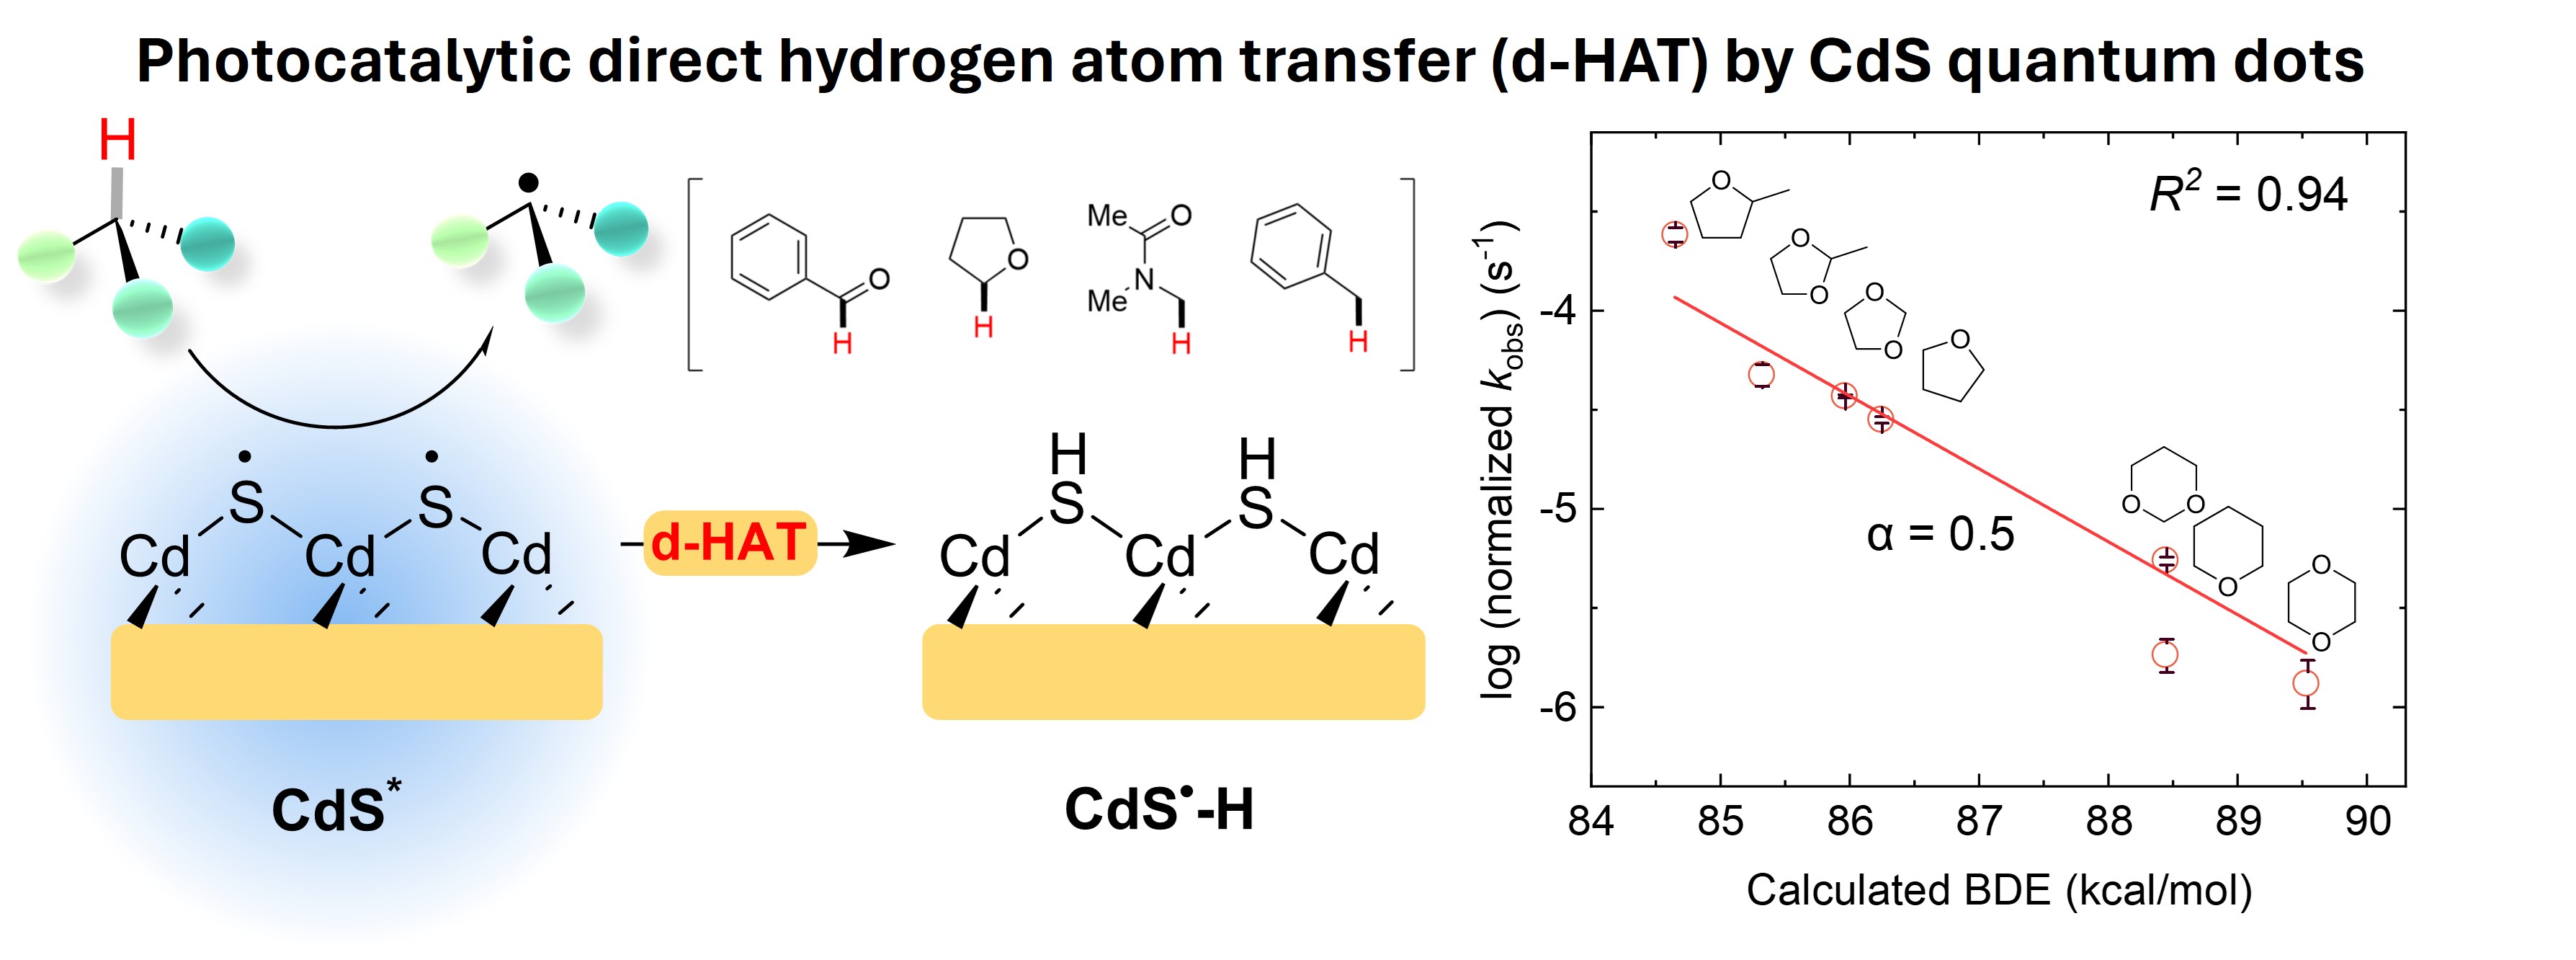 TOC graphic for "CdS Quantum Dot Gels as a Direct Hydrogen Atom Transfer Photocatalyst for C-H Activation"